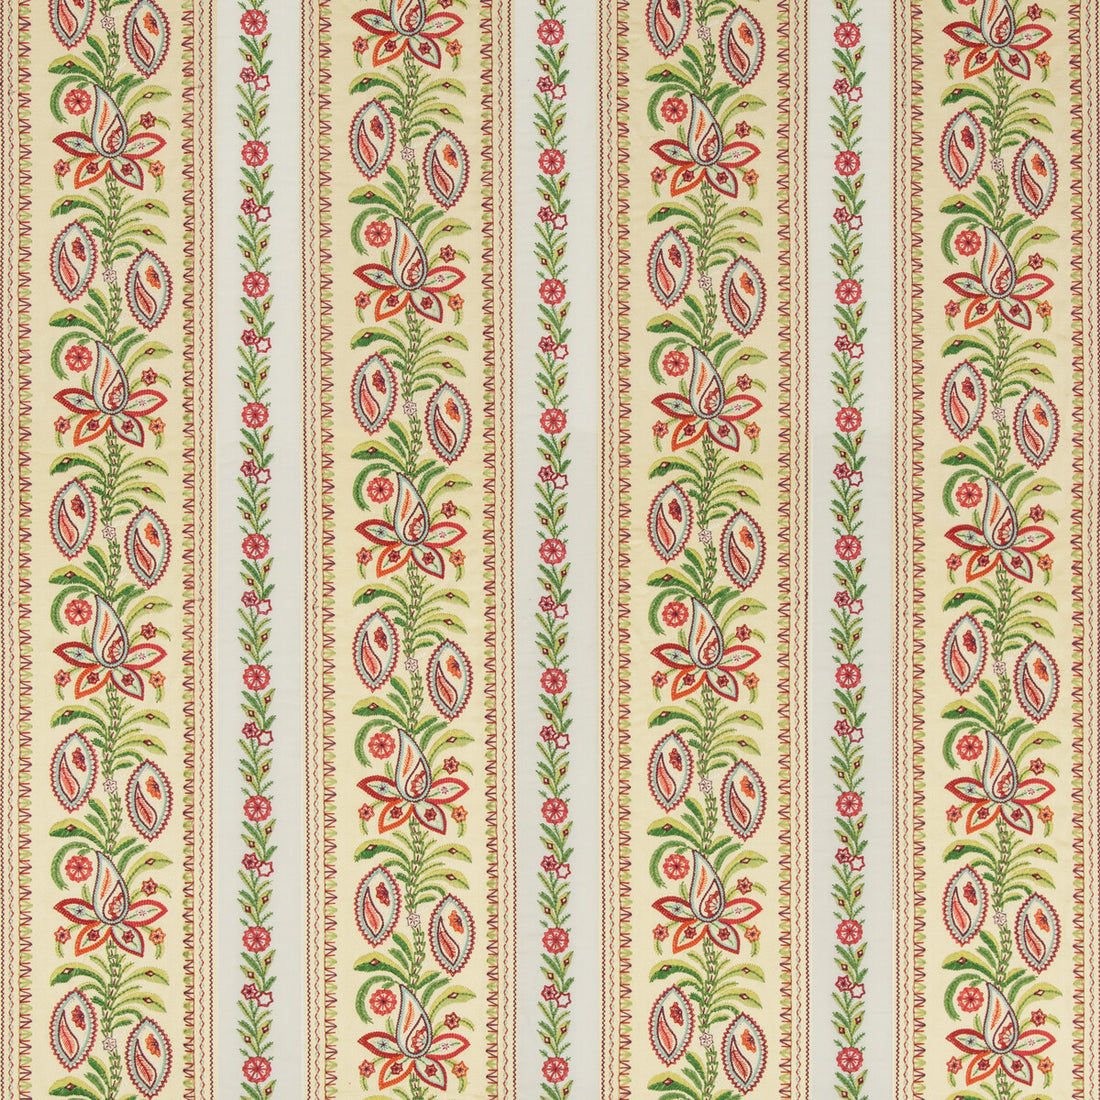 Henner Emb fabric in spring color - pattern 8019107.473.0 - by Brunschwig &amp; Fils in the Folio Francais collection